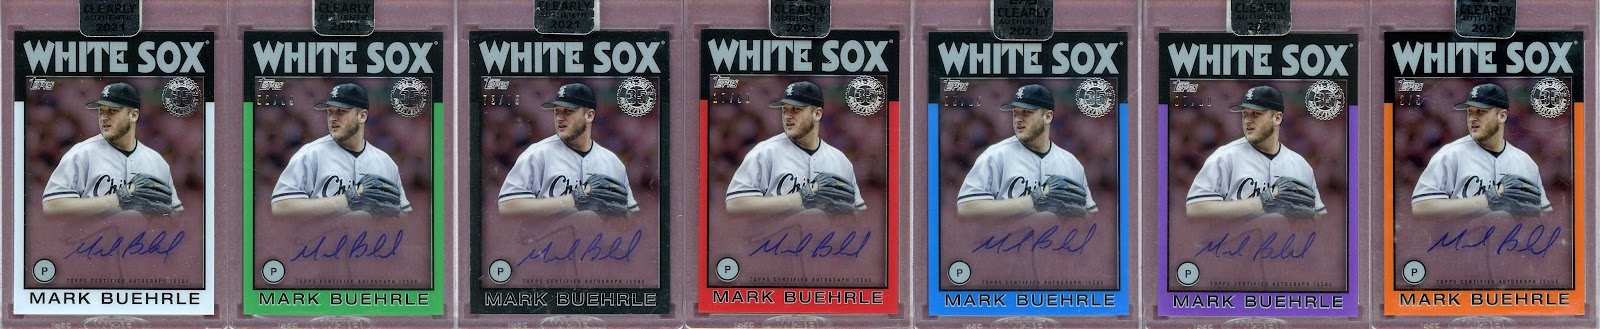 My Mark Buehrle Collection